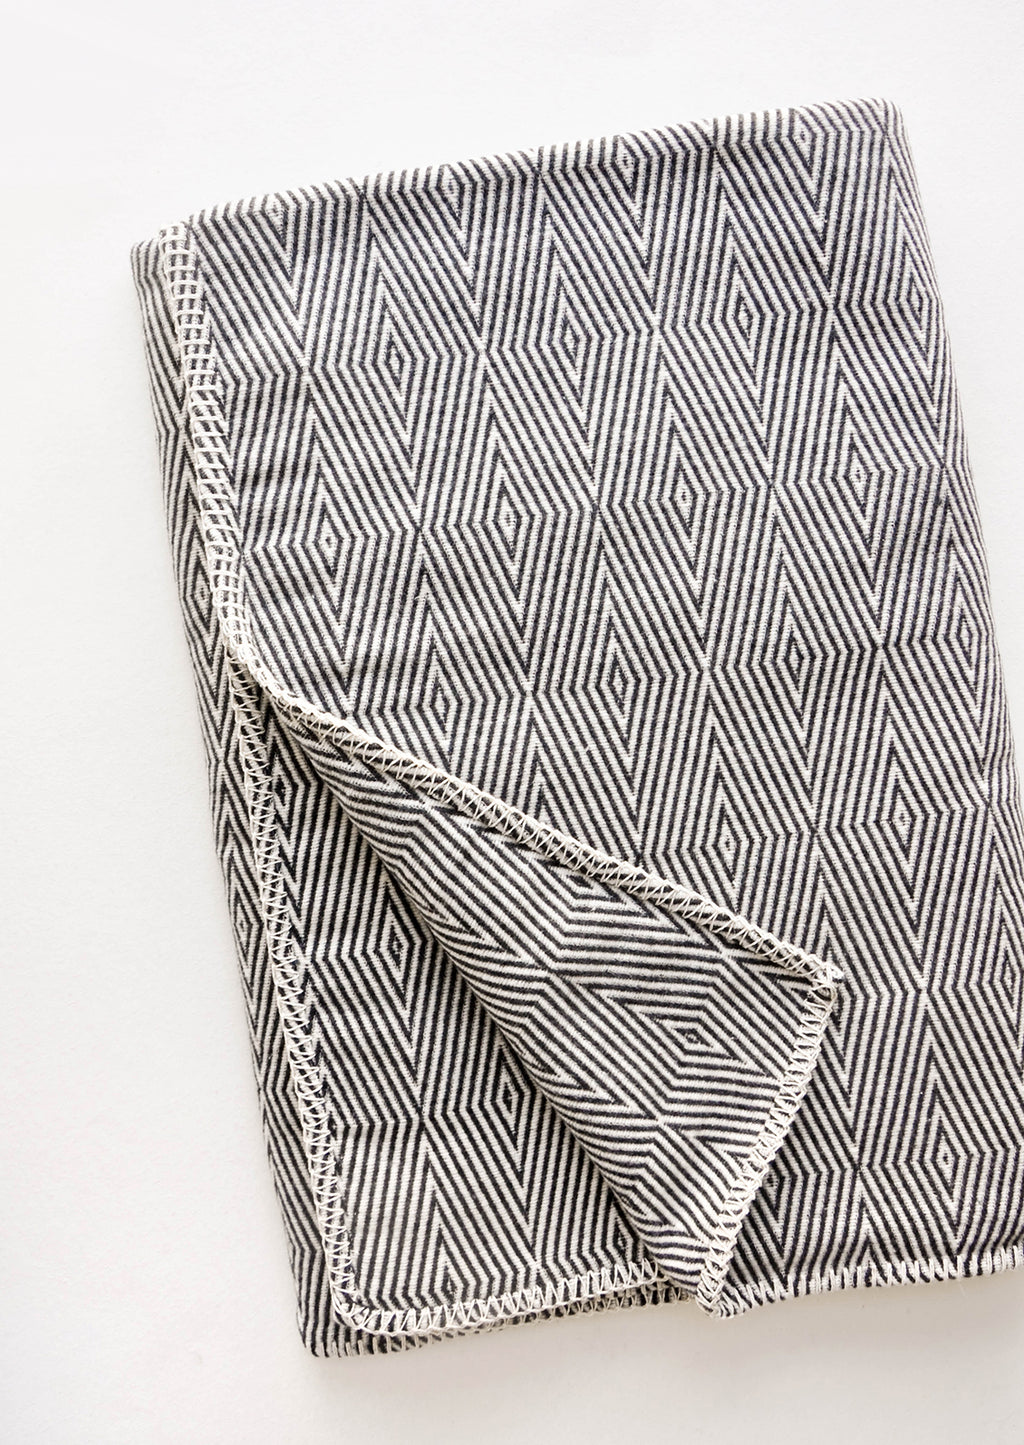 1: Cotton blanket with allover geometric diamond pattern in black and white